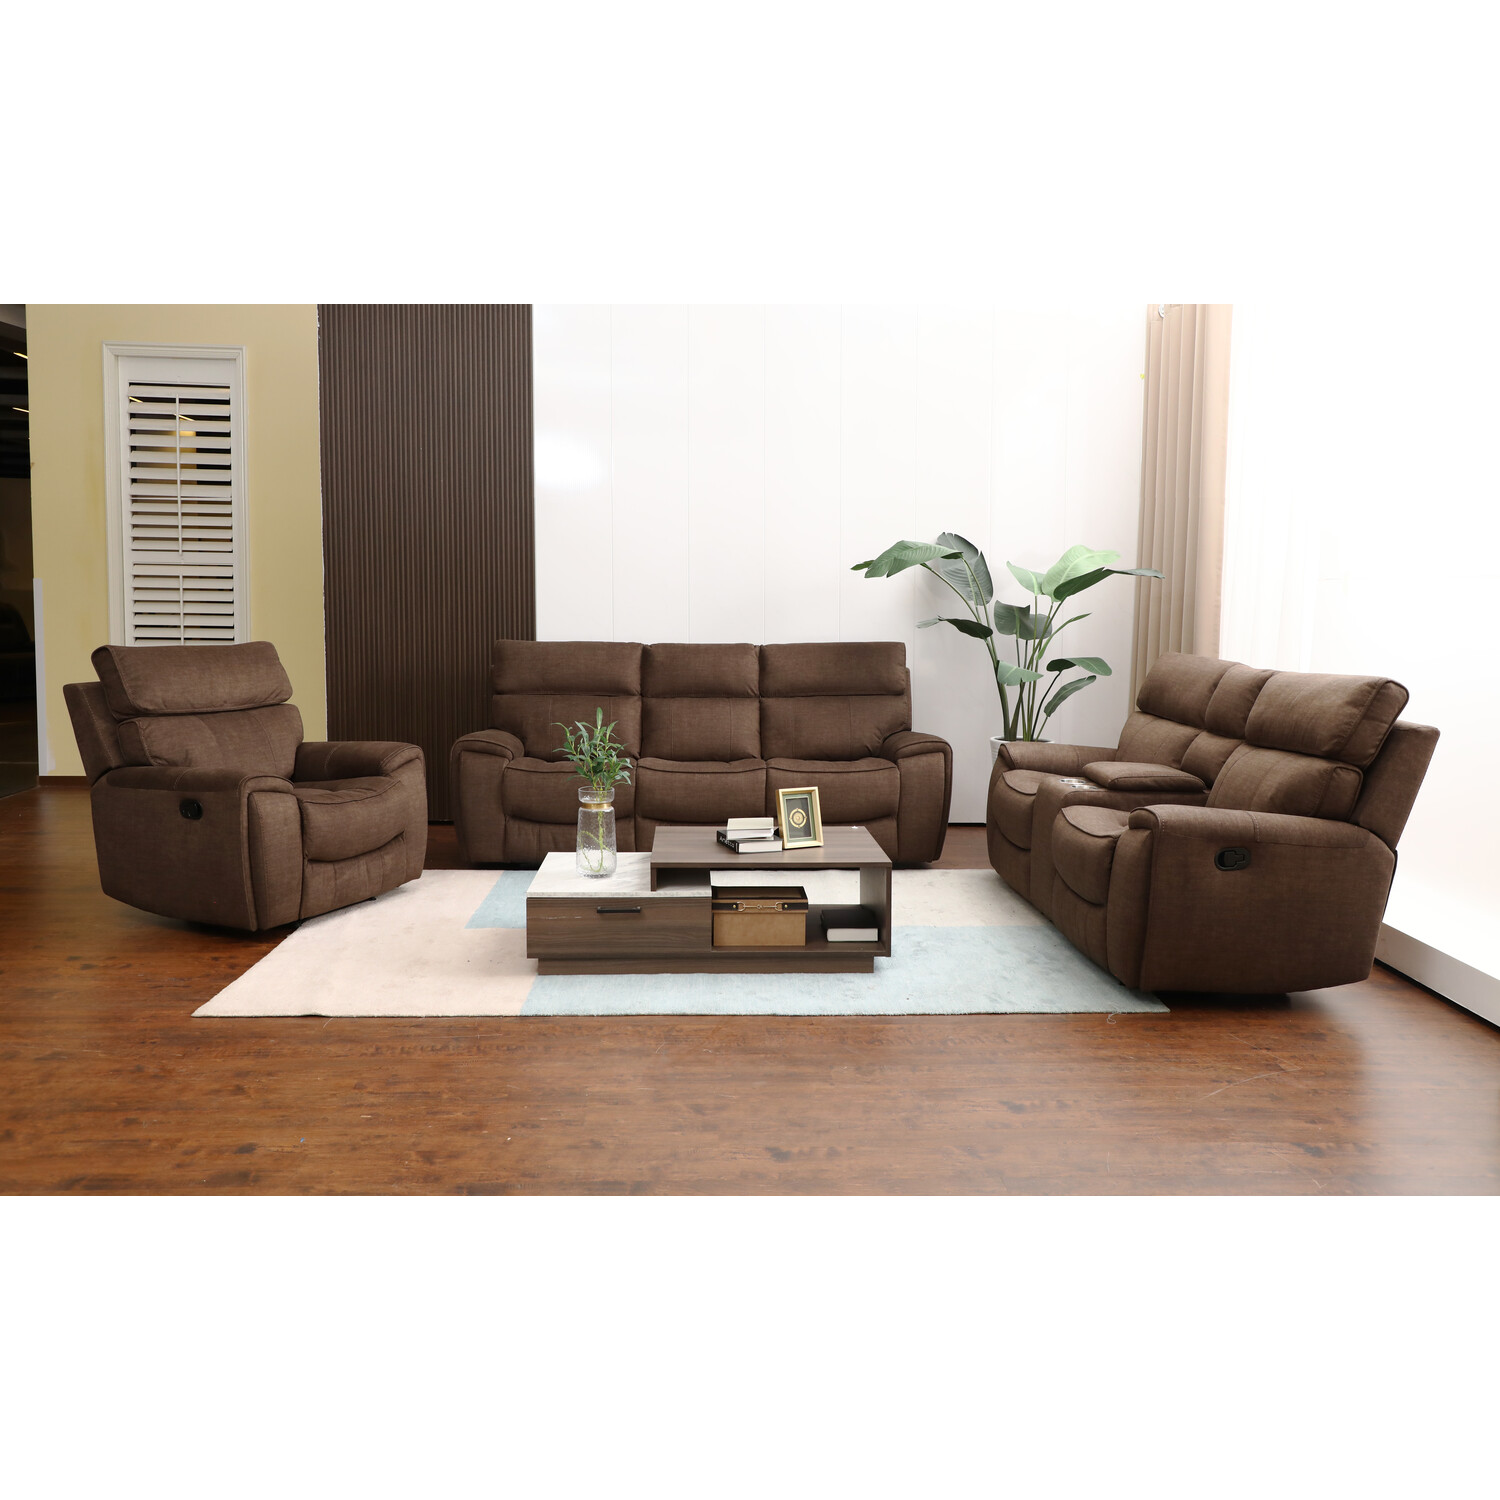 Cancun Brown Manual Recliner Chair with Footrest | Wilko